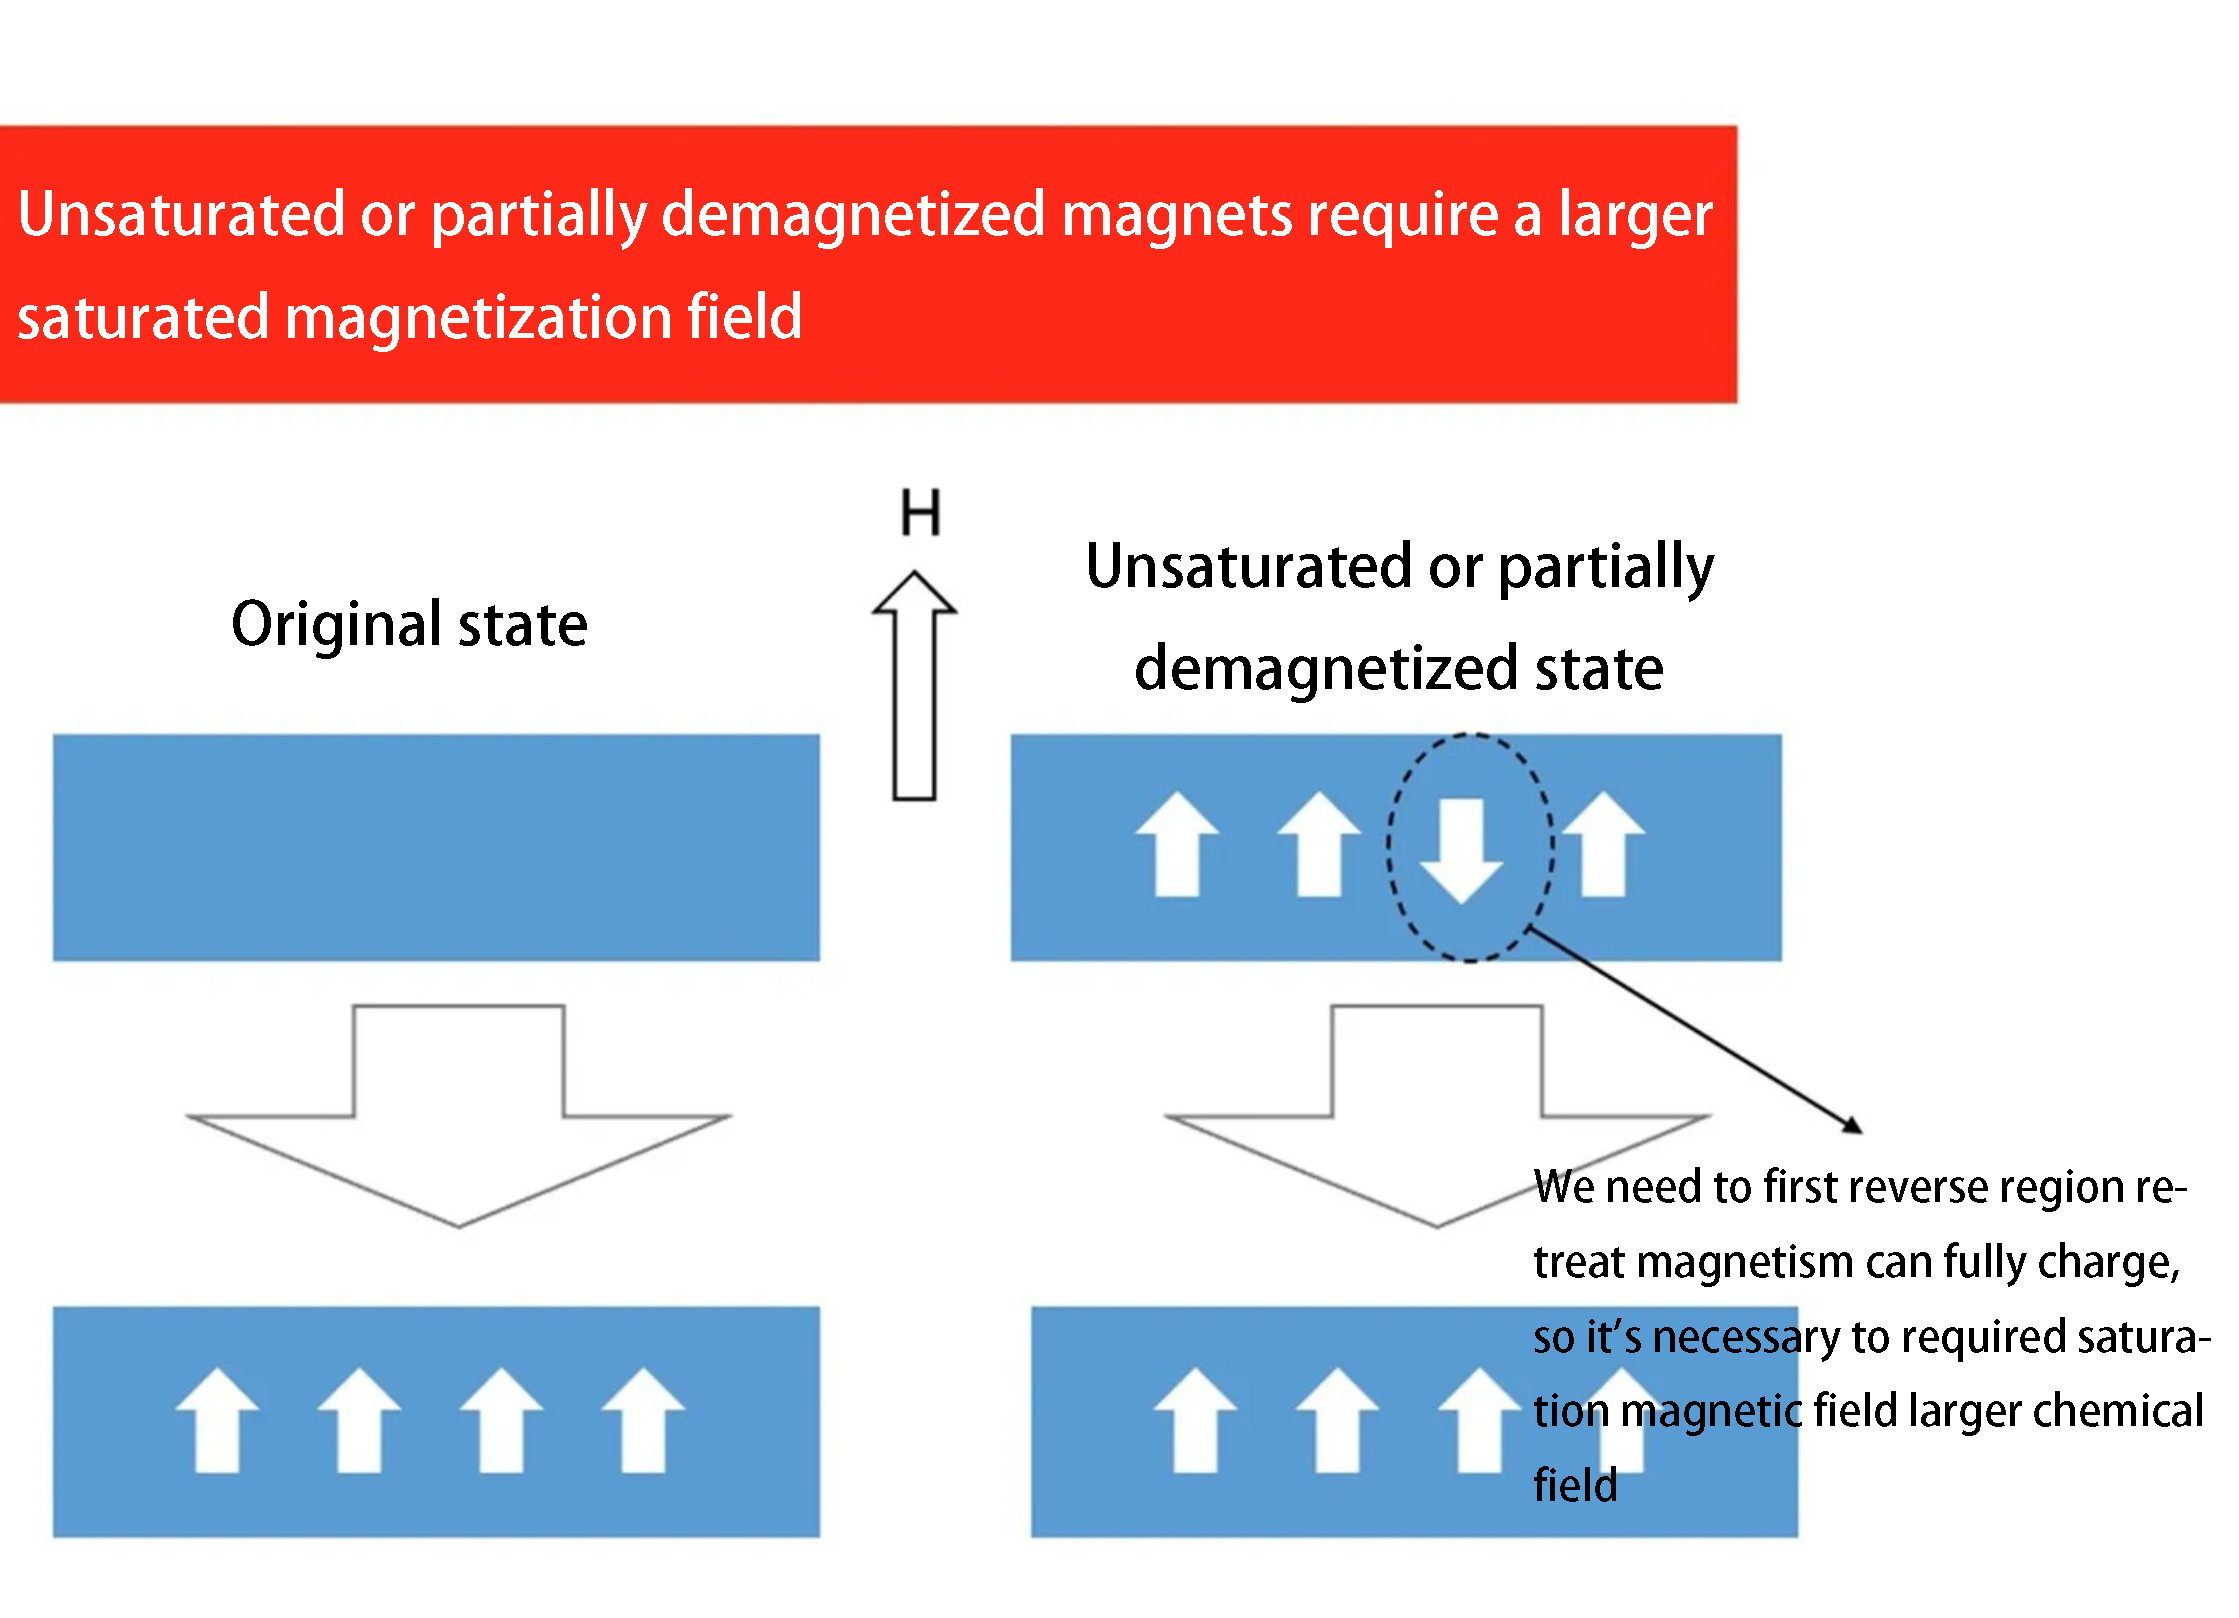 Unsaturated or partially demagnetized magnets